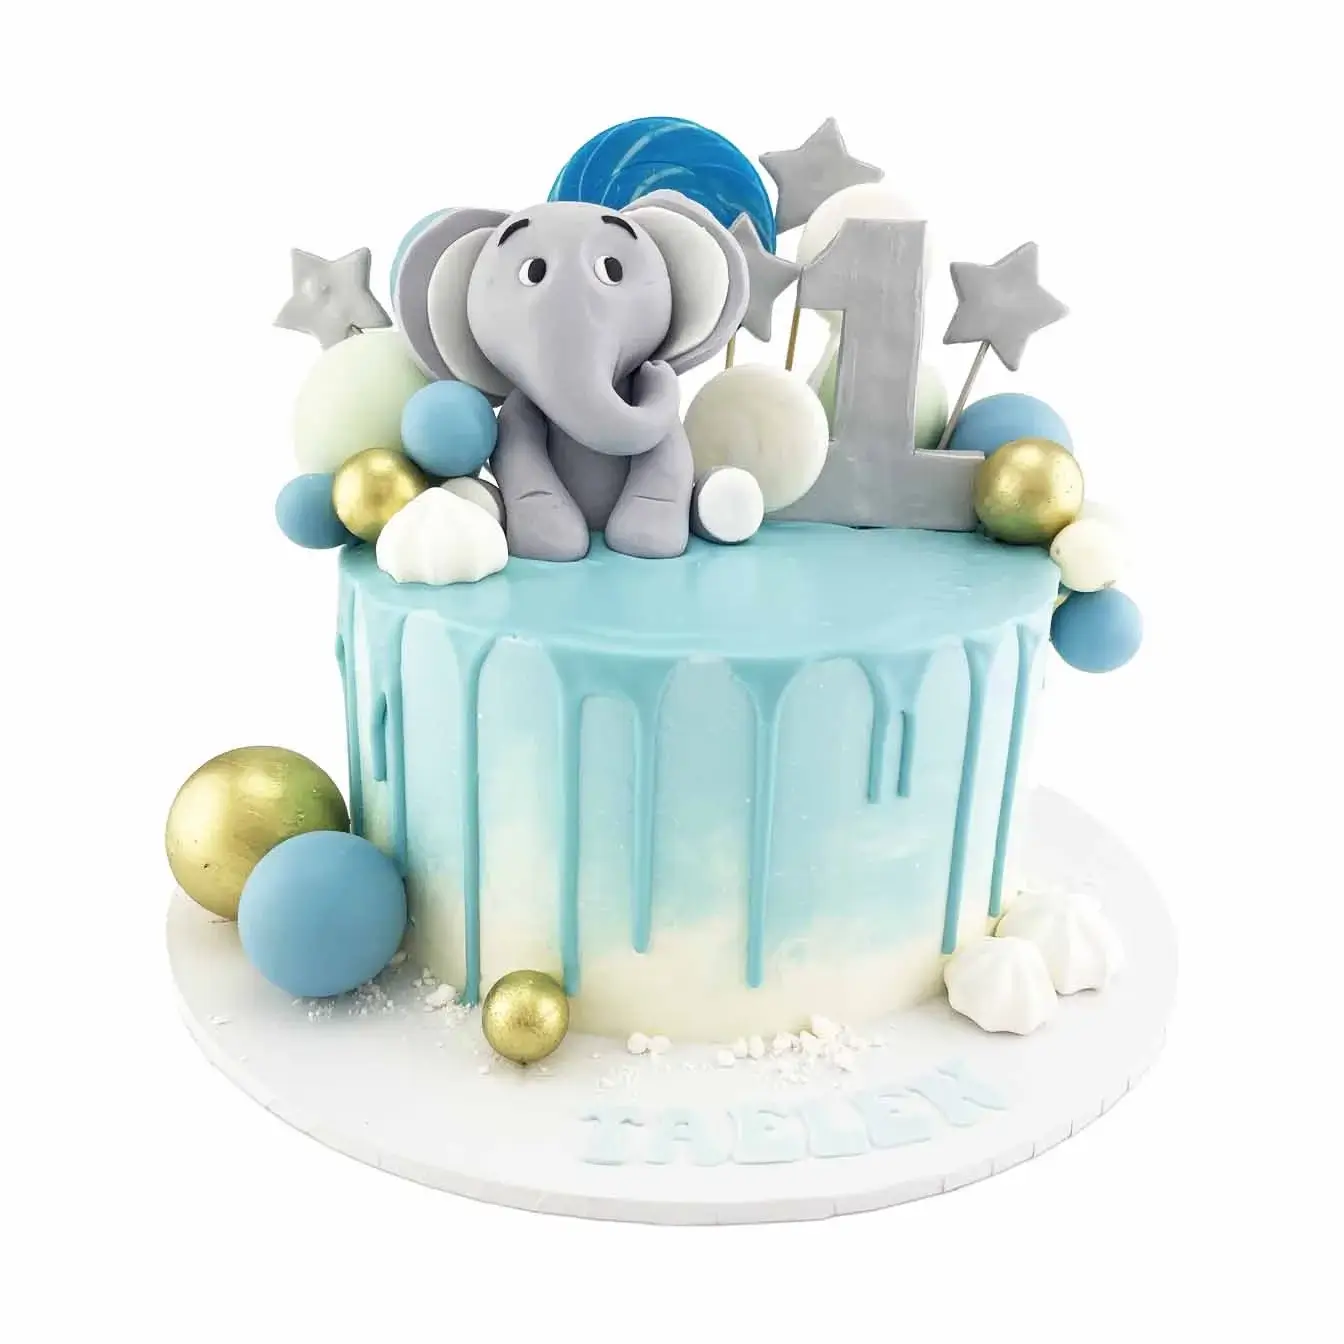 Blue ombre baby elephant drip cake with moulded elephant on top, chocolate spheres, lollipops, and meringues as decorations.